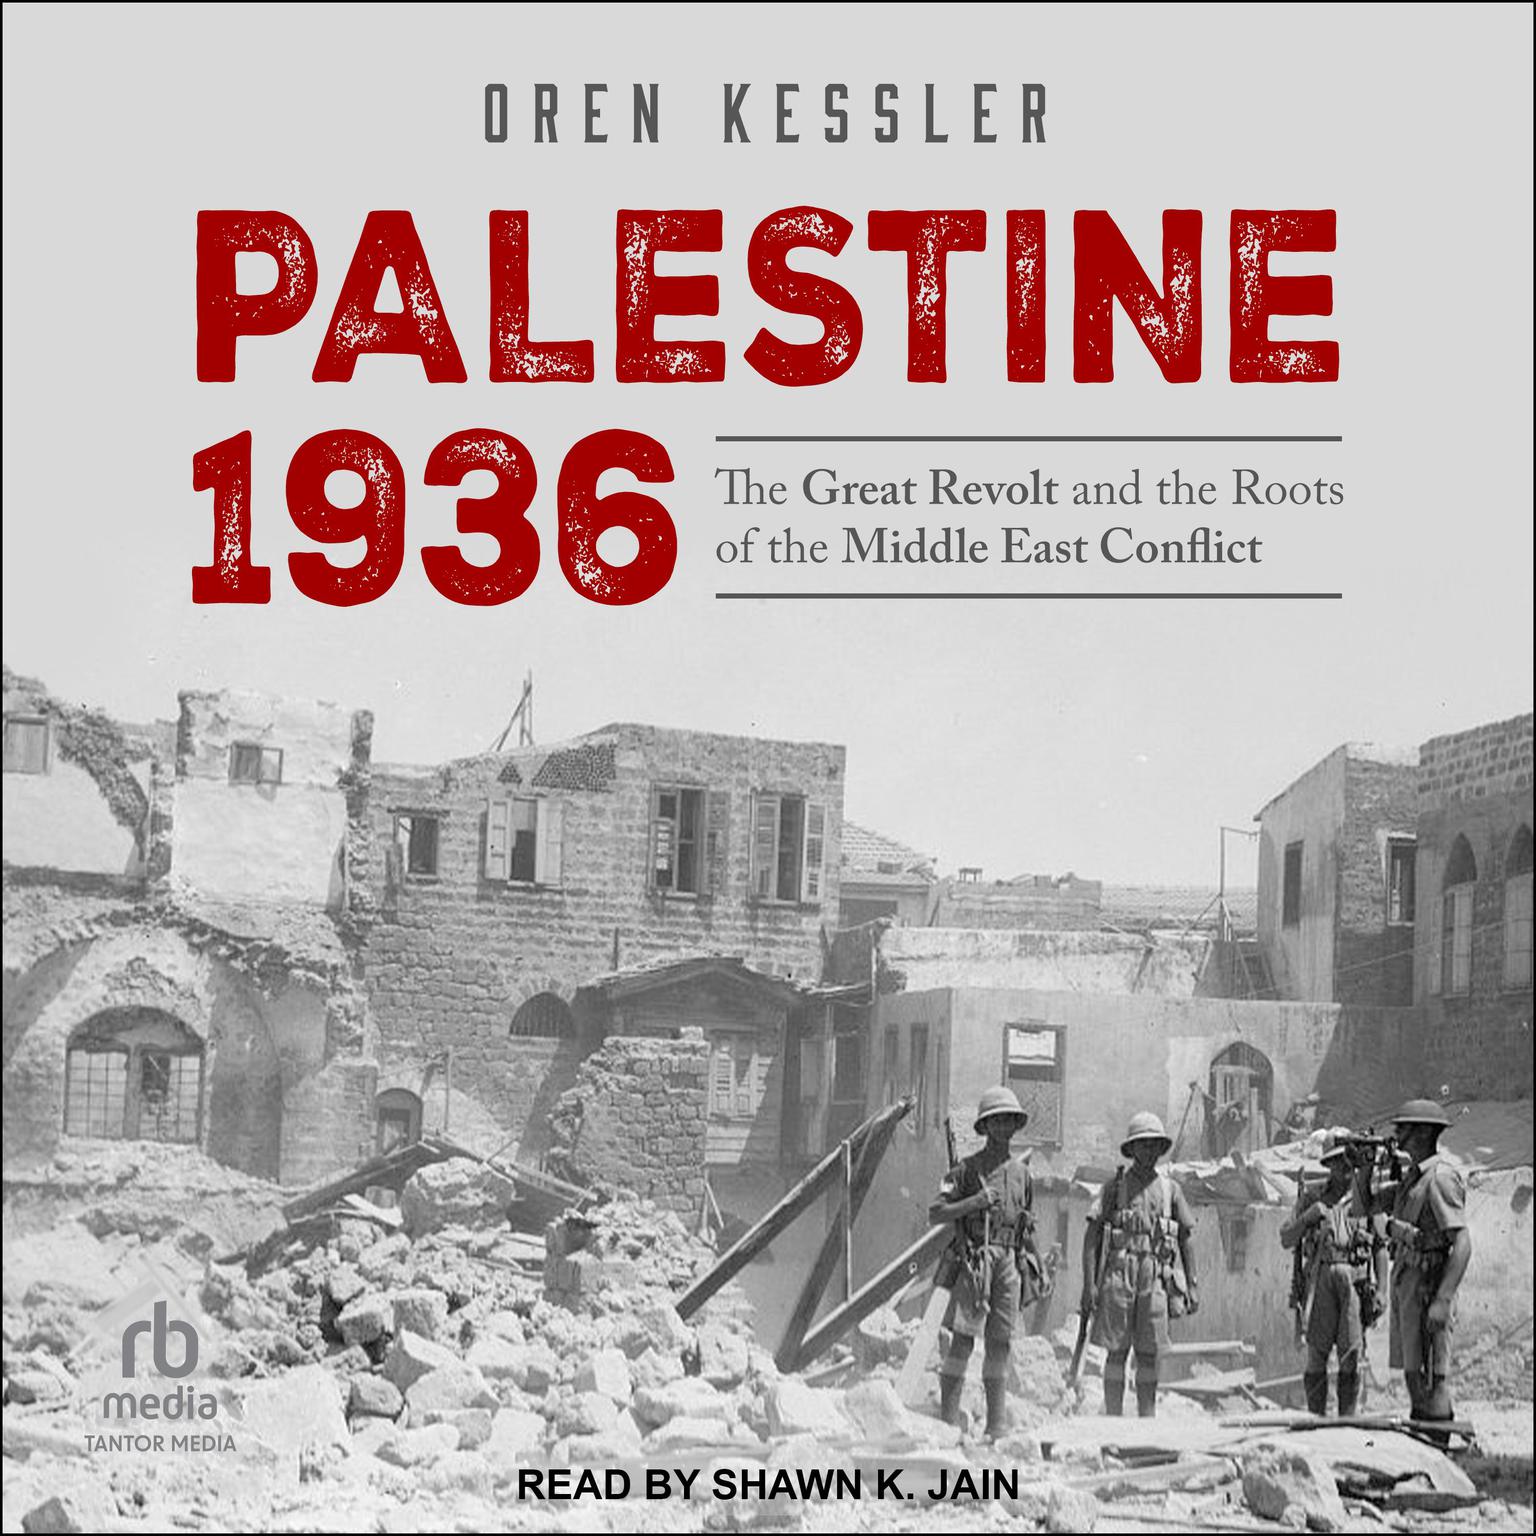 Palestine 1936: The Great Revolt and the Roots of the Middle East Conflict Audiobook, by Oren Kessler